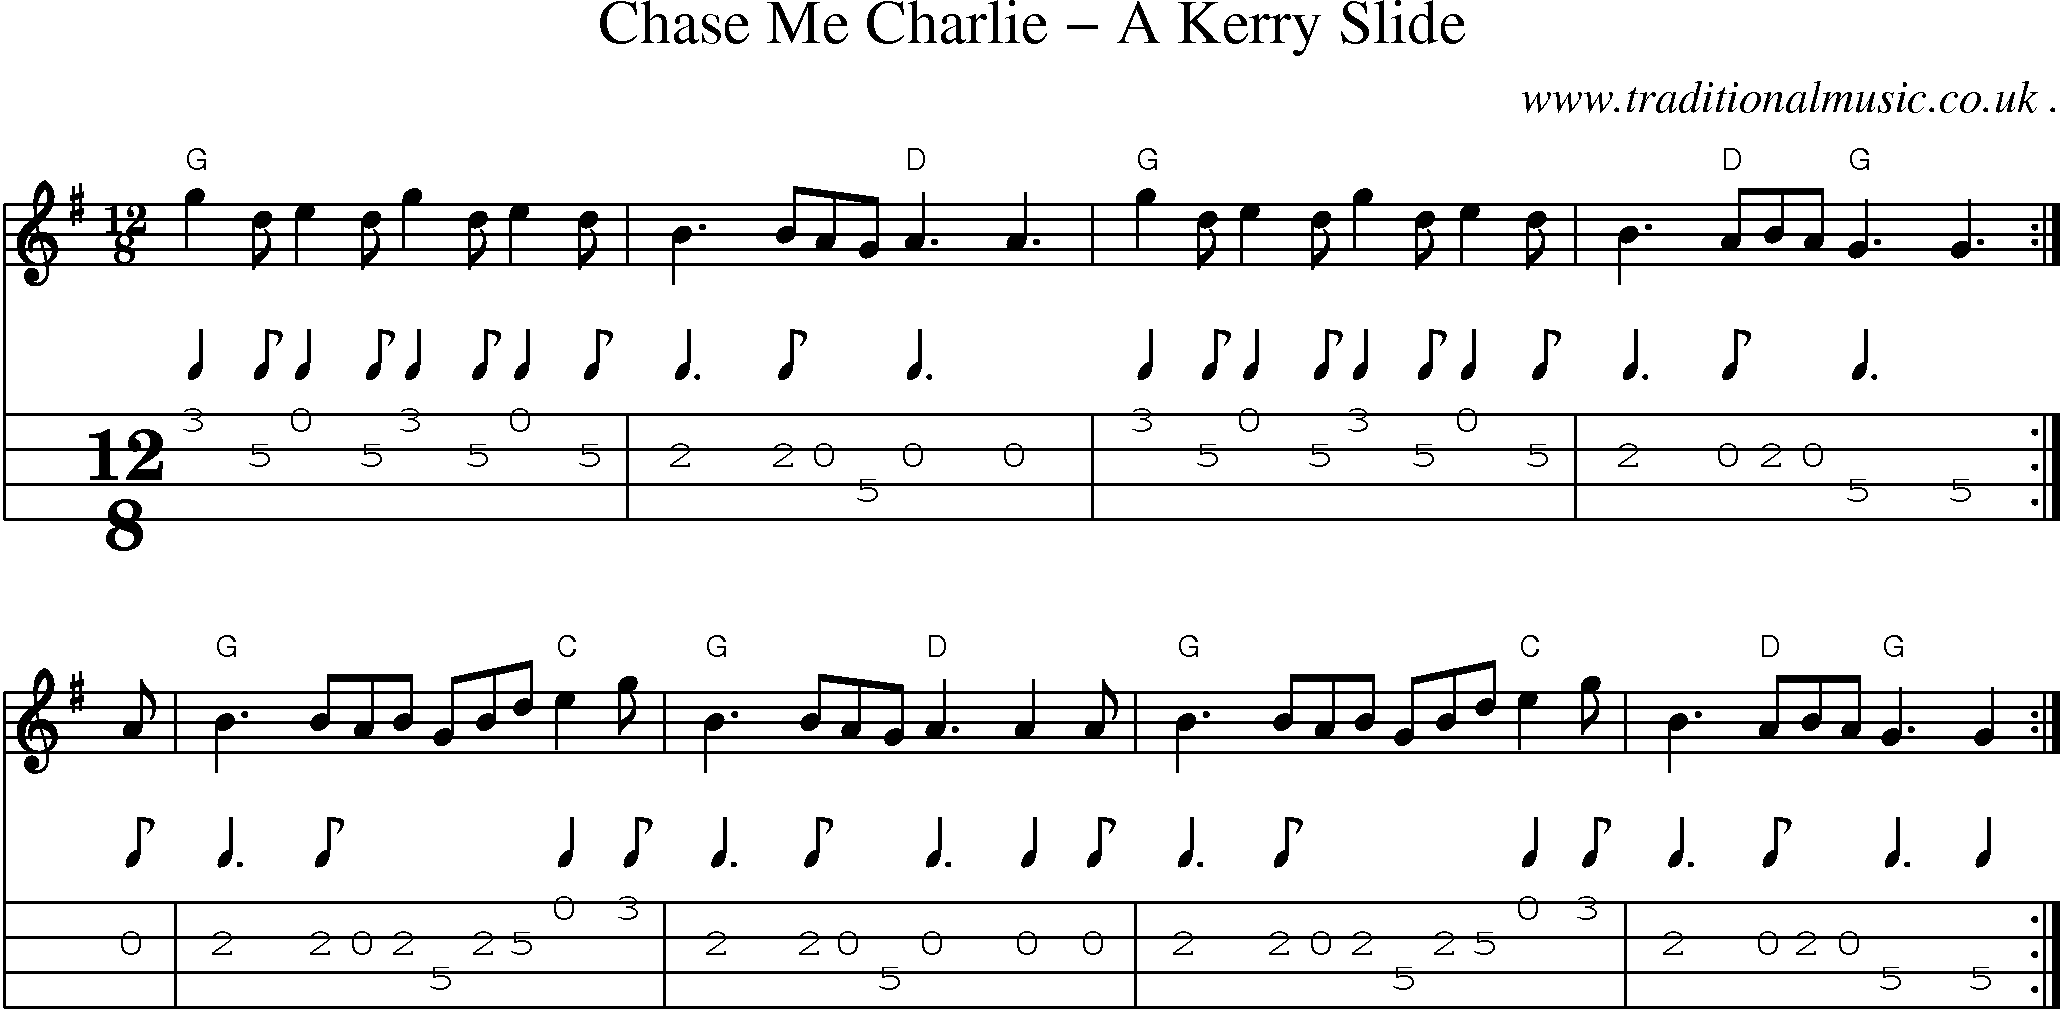 Music Score and Guitar Tabs for Chase Me Charlie A Kerry Slide